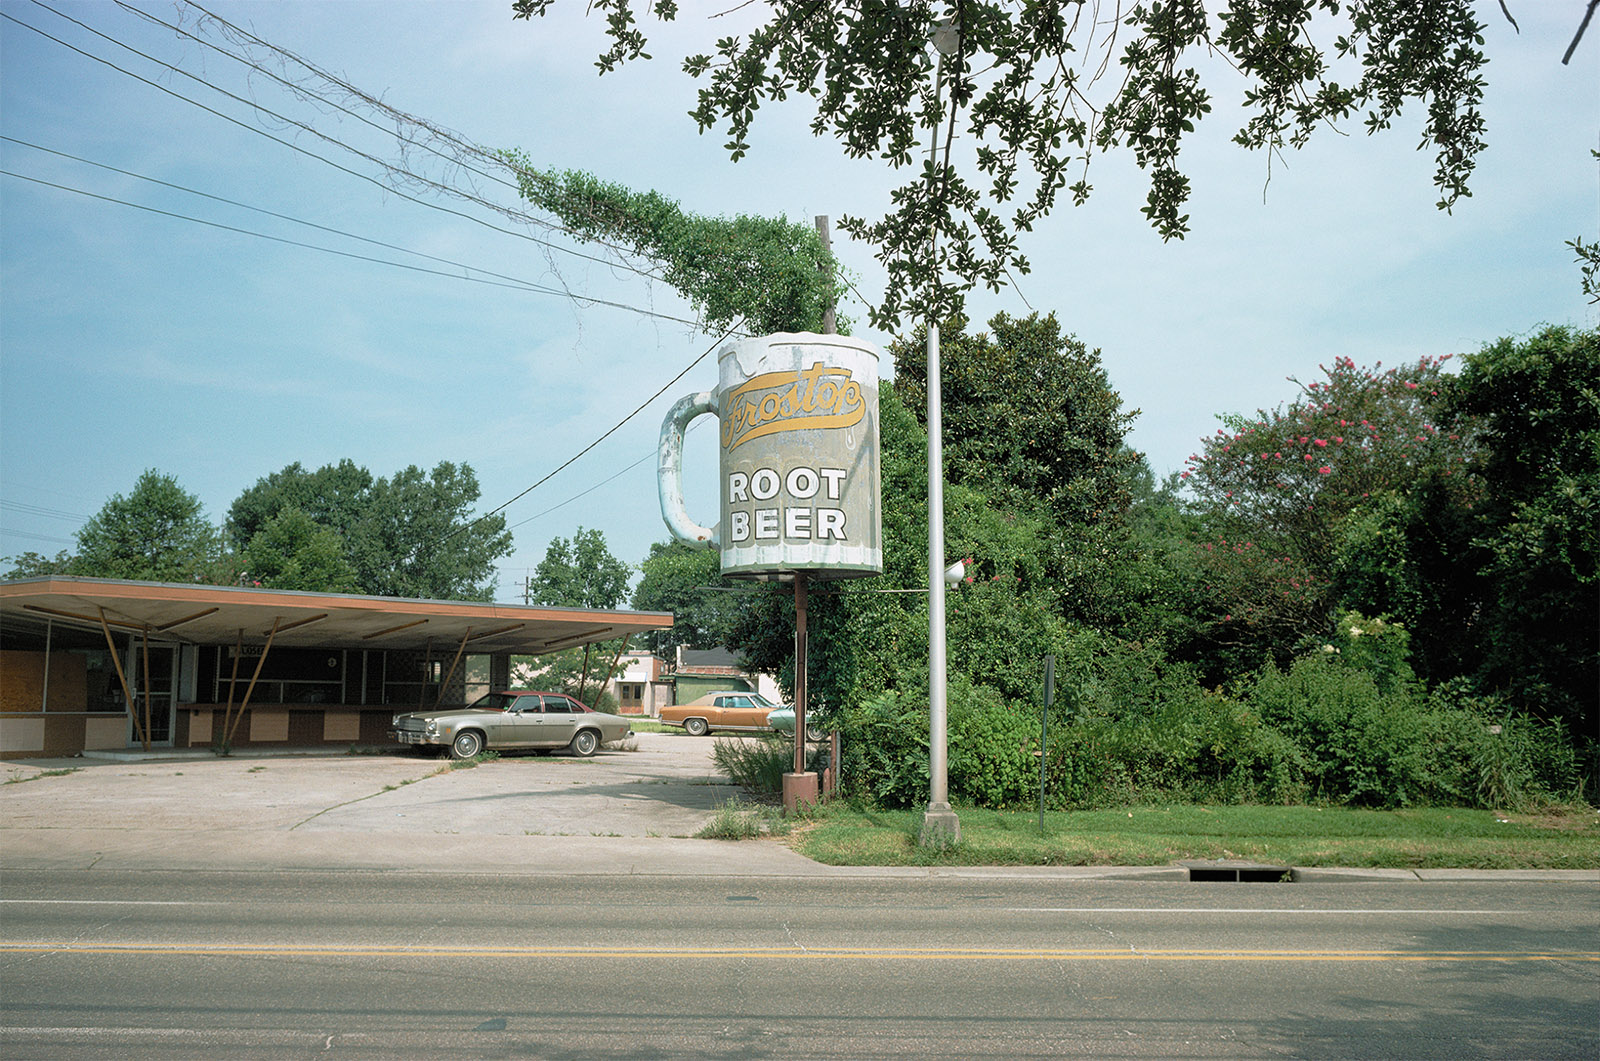 A photograph by Stephen Shore from Transparencies: Small Camera Works 1971–1979, a collection of his images of the North American landscape just published by Mack 